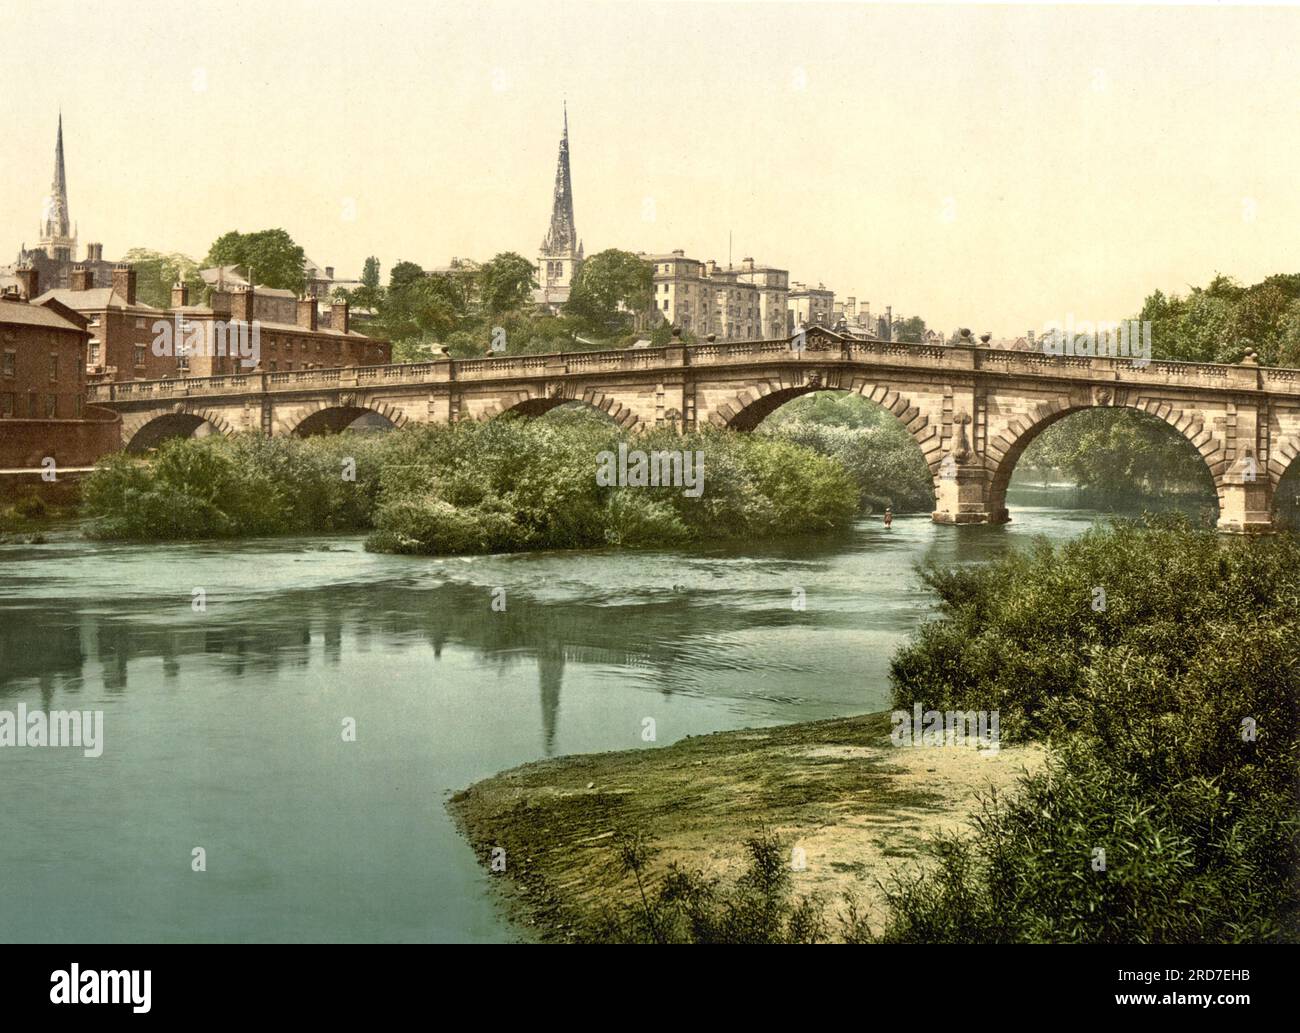 English Bridge, Shrewsbury, a market town, civil parish, and the county town of Shropshire, England, 1895, Historical, digital improved reproduction of an old Photochrome print Stock Photo